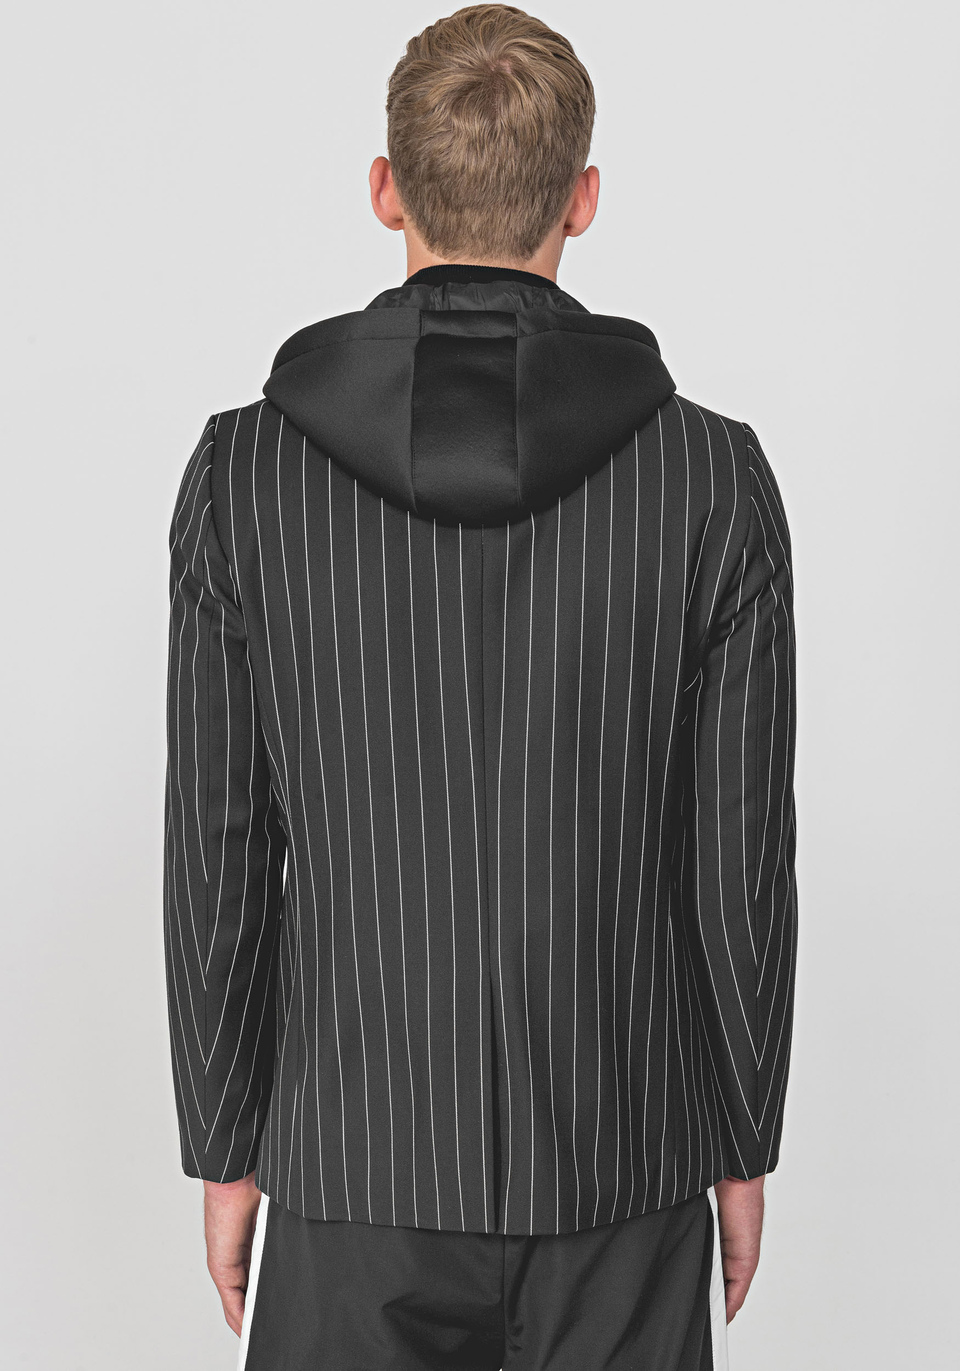 SINGLE-BREASTED SLIM-FIT JACKET IN A PINSTRIPE TWILL WITH A REMOVABLE VEST - Antony Morato Online Shop